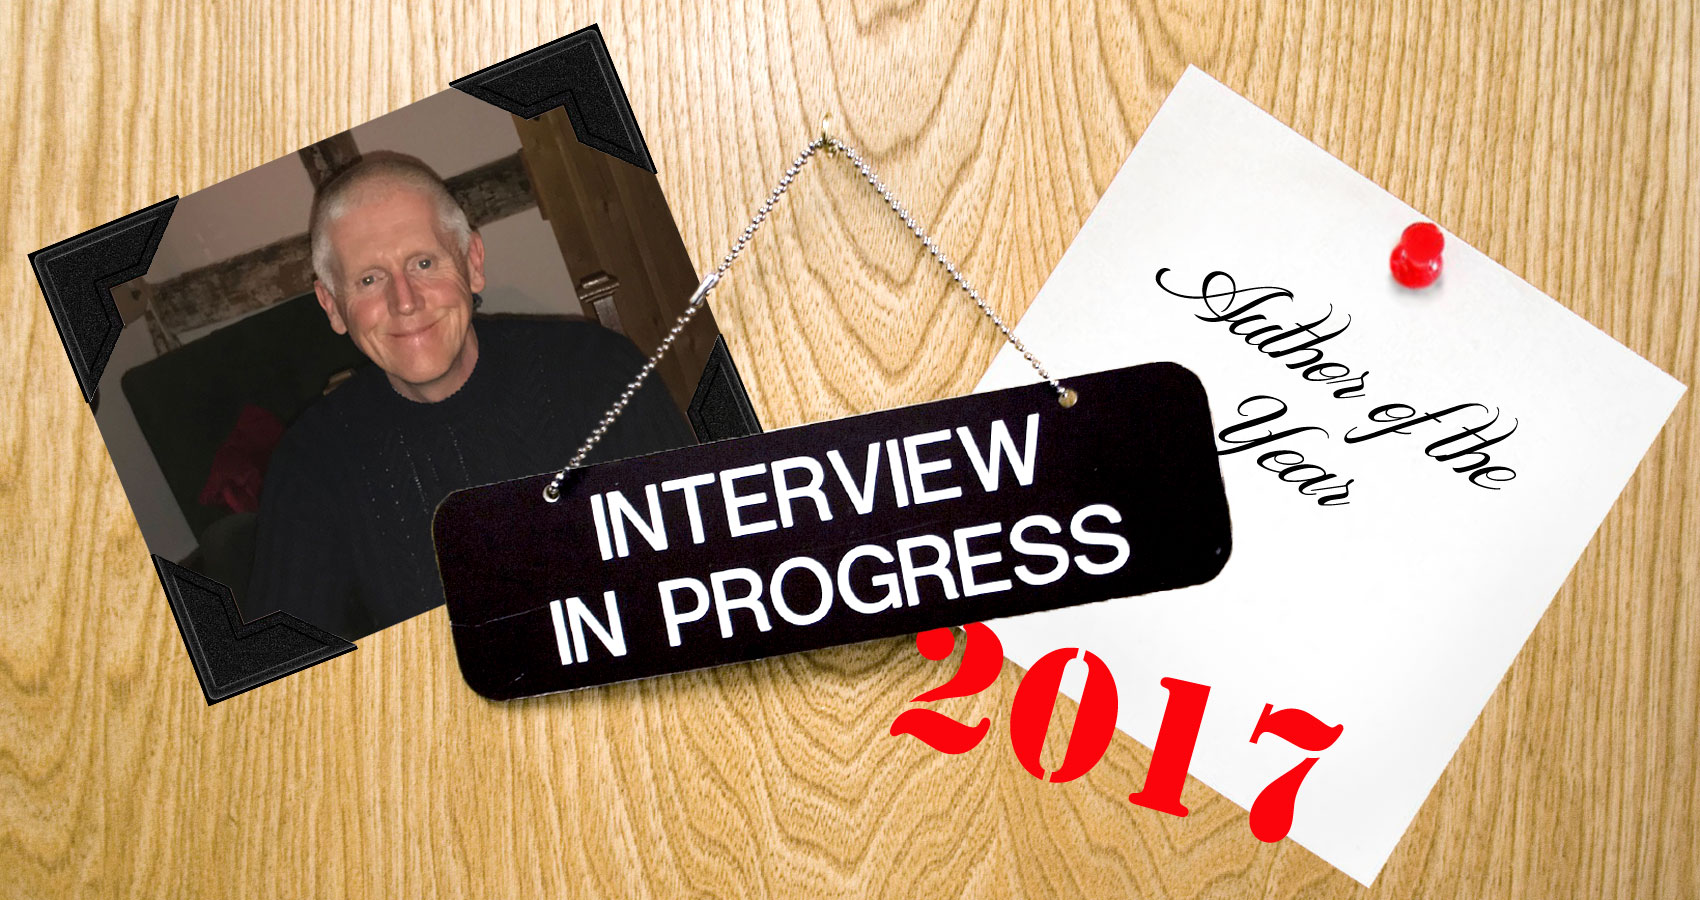 Author Of The Year 2017 Interview with Richard Wall at Spillwords.com